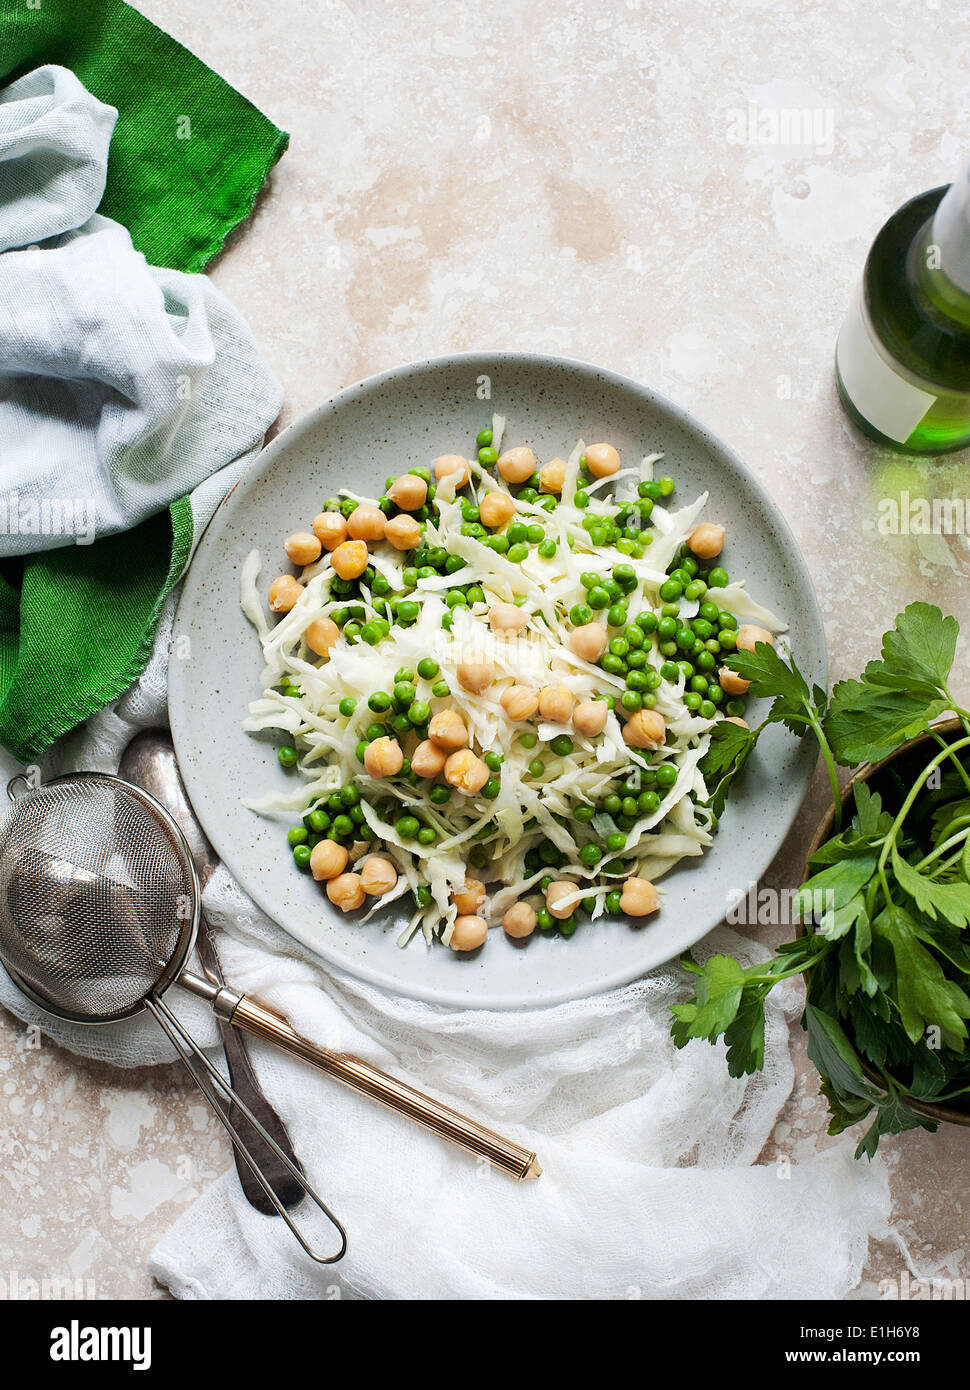 Still life of salad plate with white cabbage and peas Stock Photo